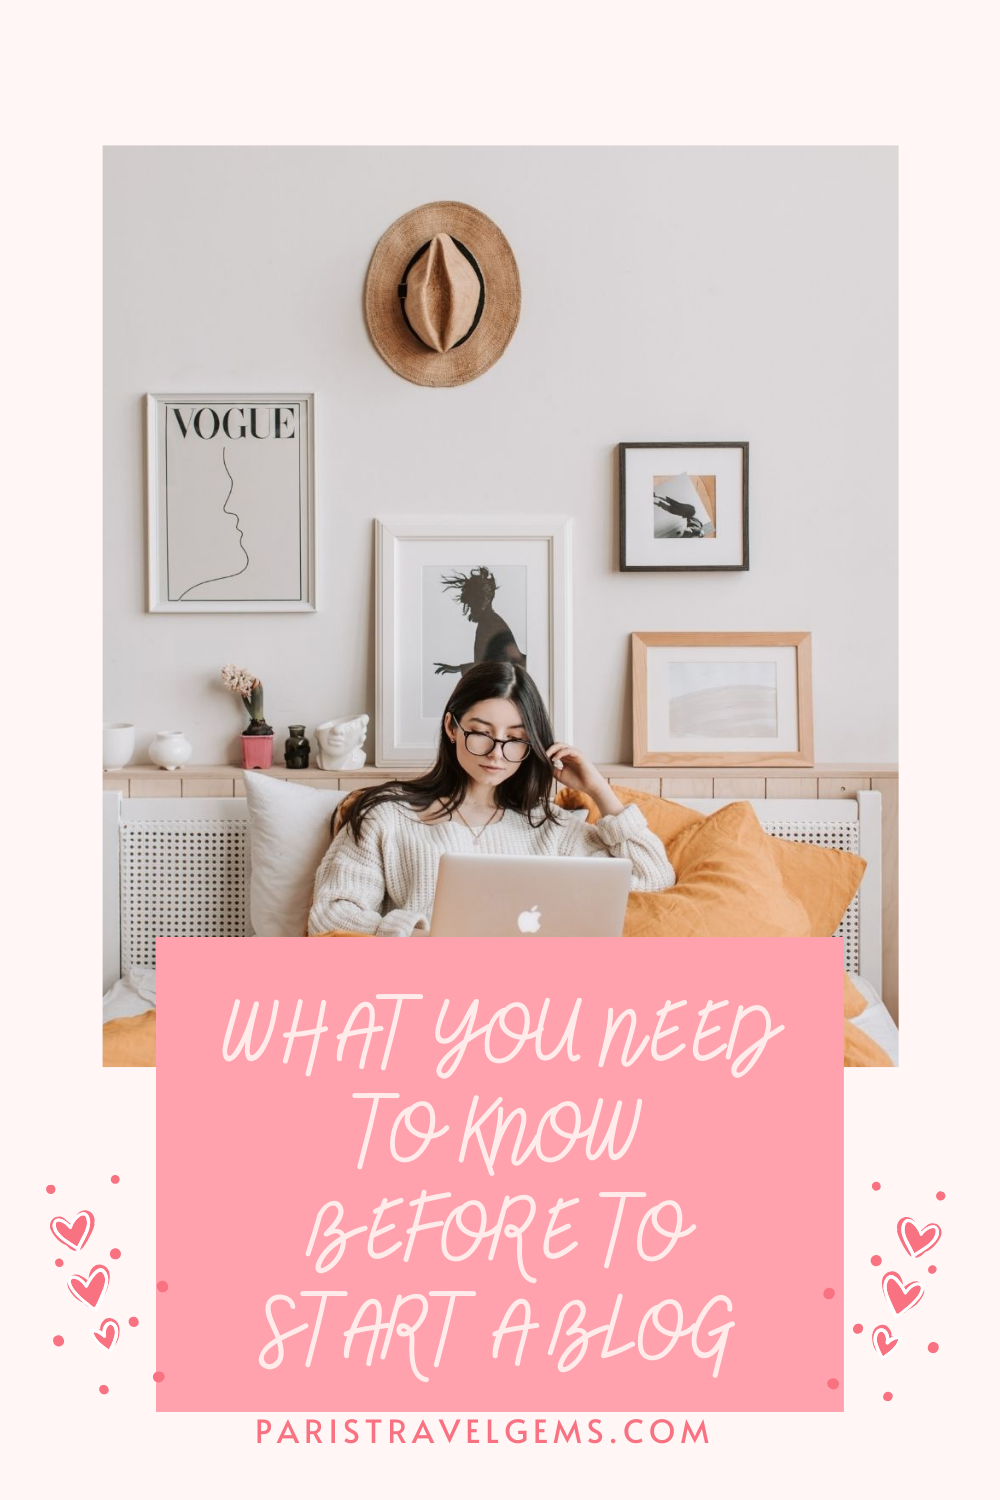 What you need to know before to start a blog